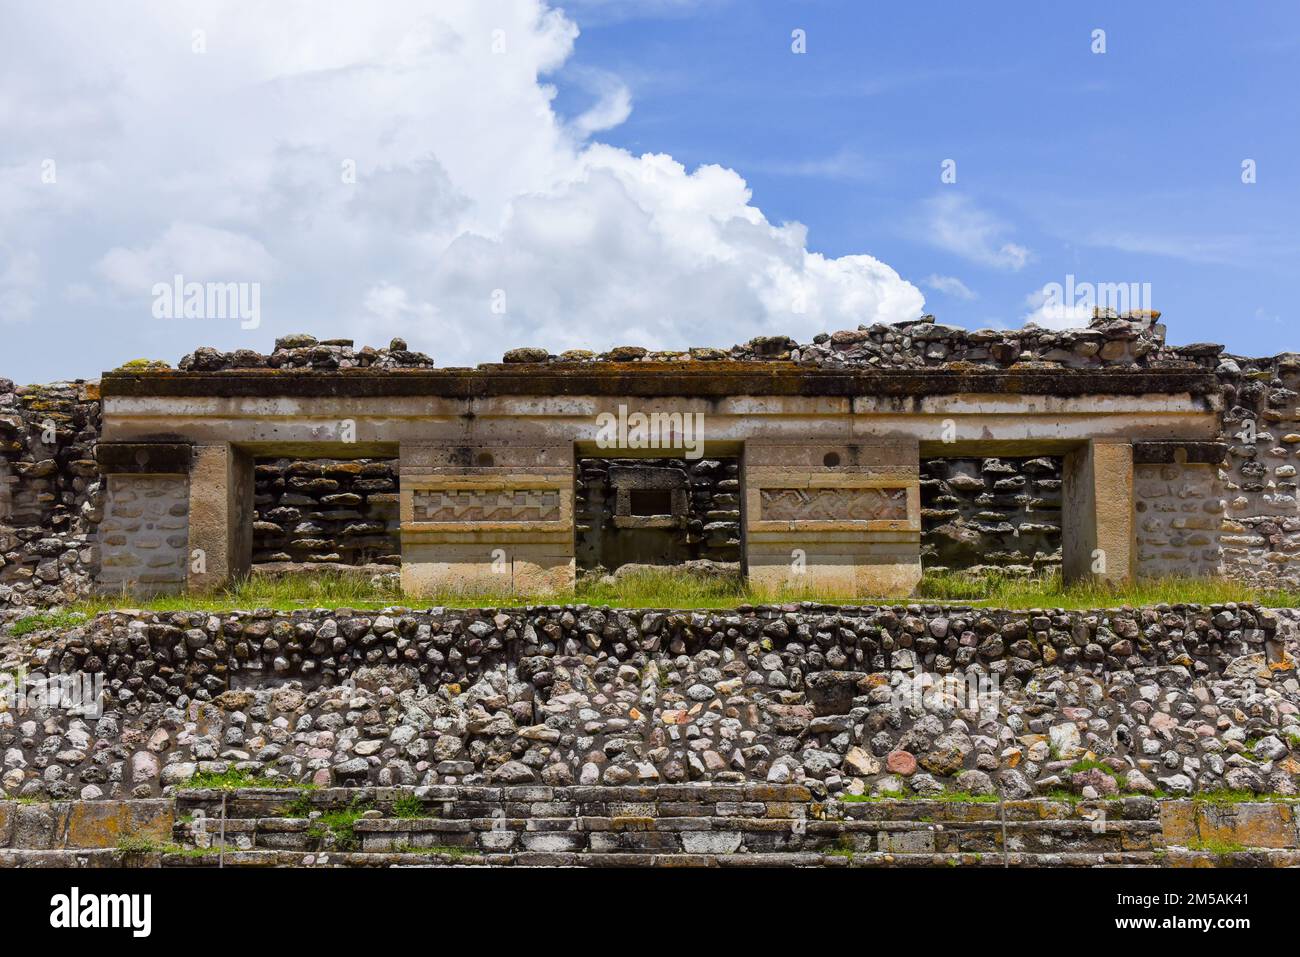 The Palace, Mitla, a mesoamerican archeological site of the Zapotec civilization, Oaxaca valley, Mexico Stock Photo